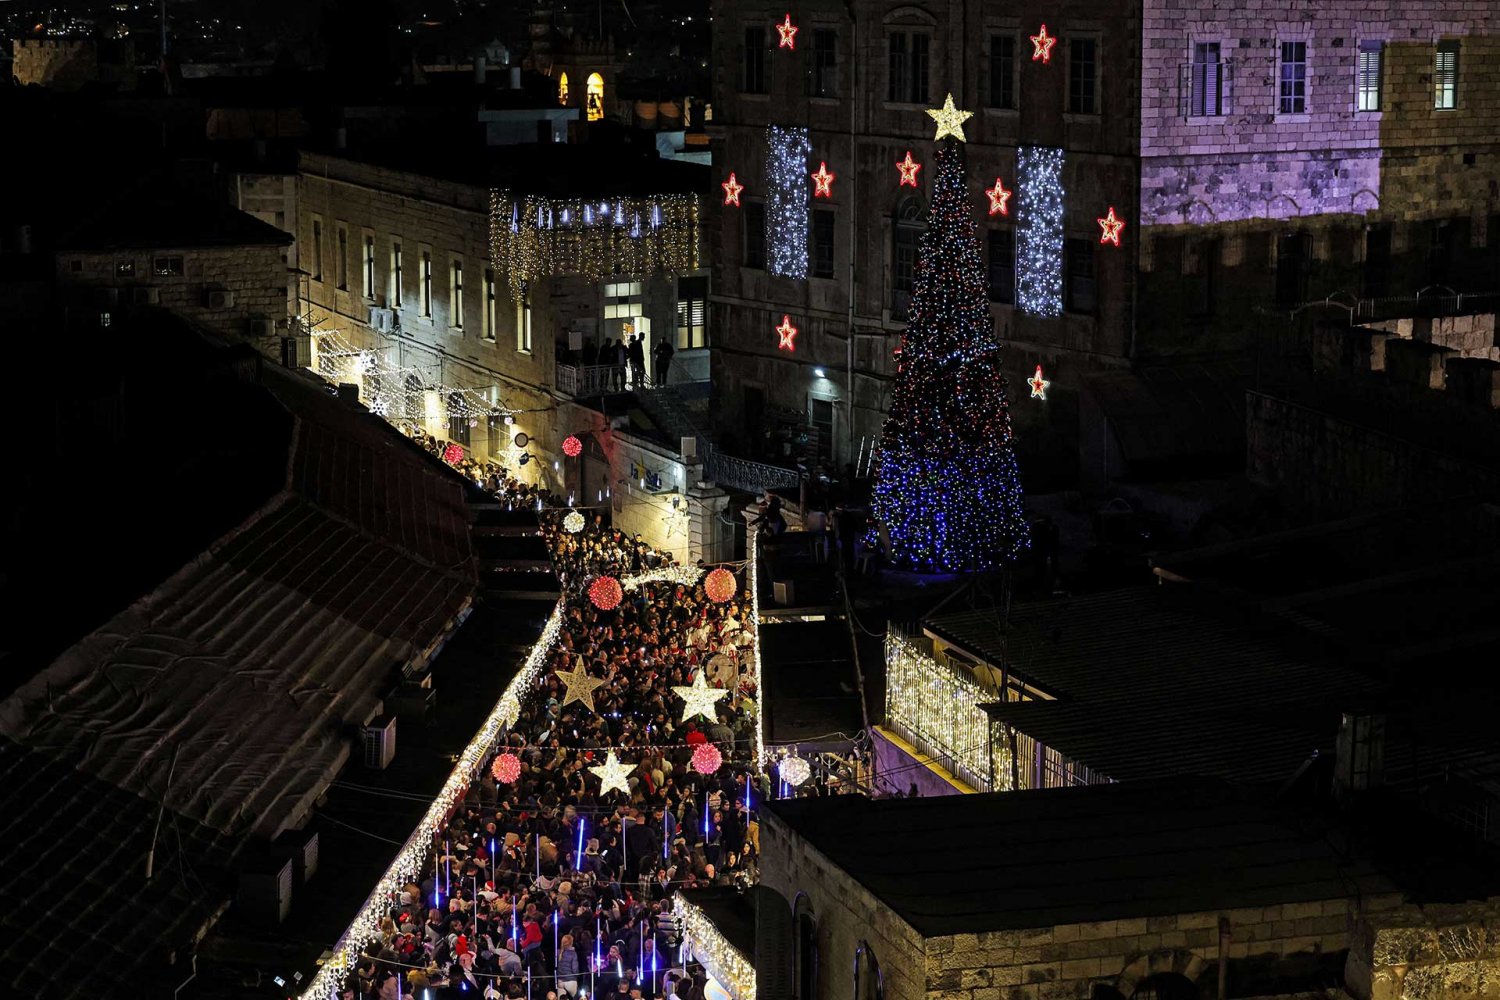 Christmas festivities in Jerusalem's Old City photographed from the rooftops above